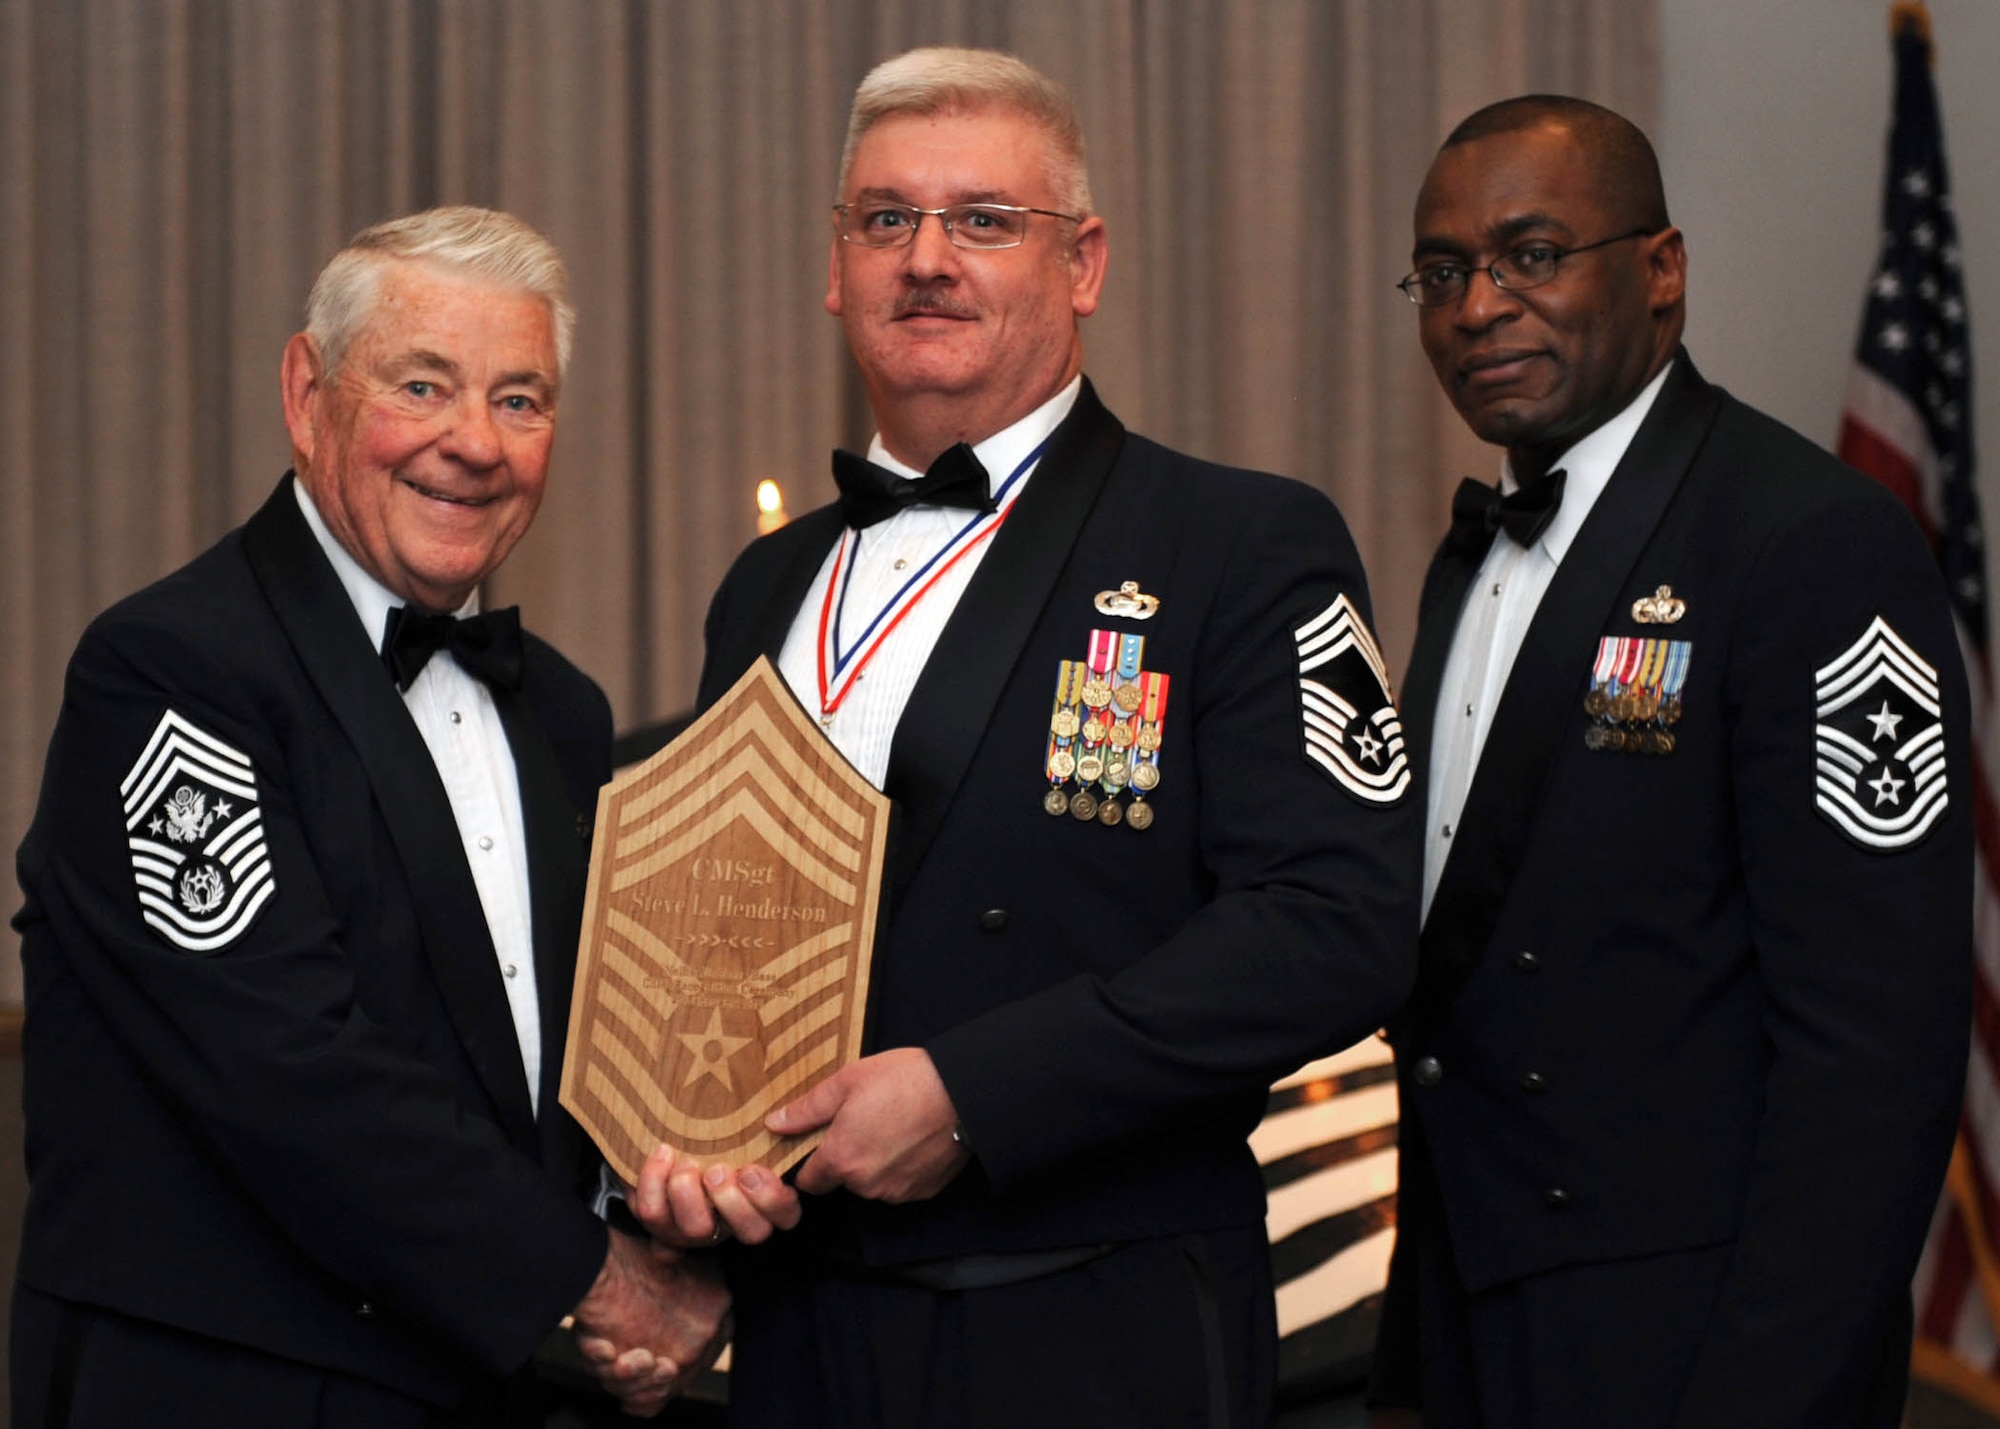 Chief Master Sergeant Steven Henderson, 78th Reconnaissance Squadron superintendent (center), is presented with a memento by Chief Master Sergeant (retired) Robert D. Gaylor (left), and 99th Air Base Wing Command Chief Master Sergeant Alfred Herring during the Chief Master Sergeant Recognition ceremony Feb. 26. Chief Henderson is the 78th RS' newest senior non-commissioned officer to join the top one percent of the enlisted force promoted to the rank of chief. (U.S. Air Force photo/Staff Sgt. Erin Worley)
